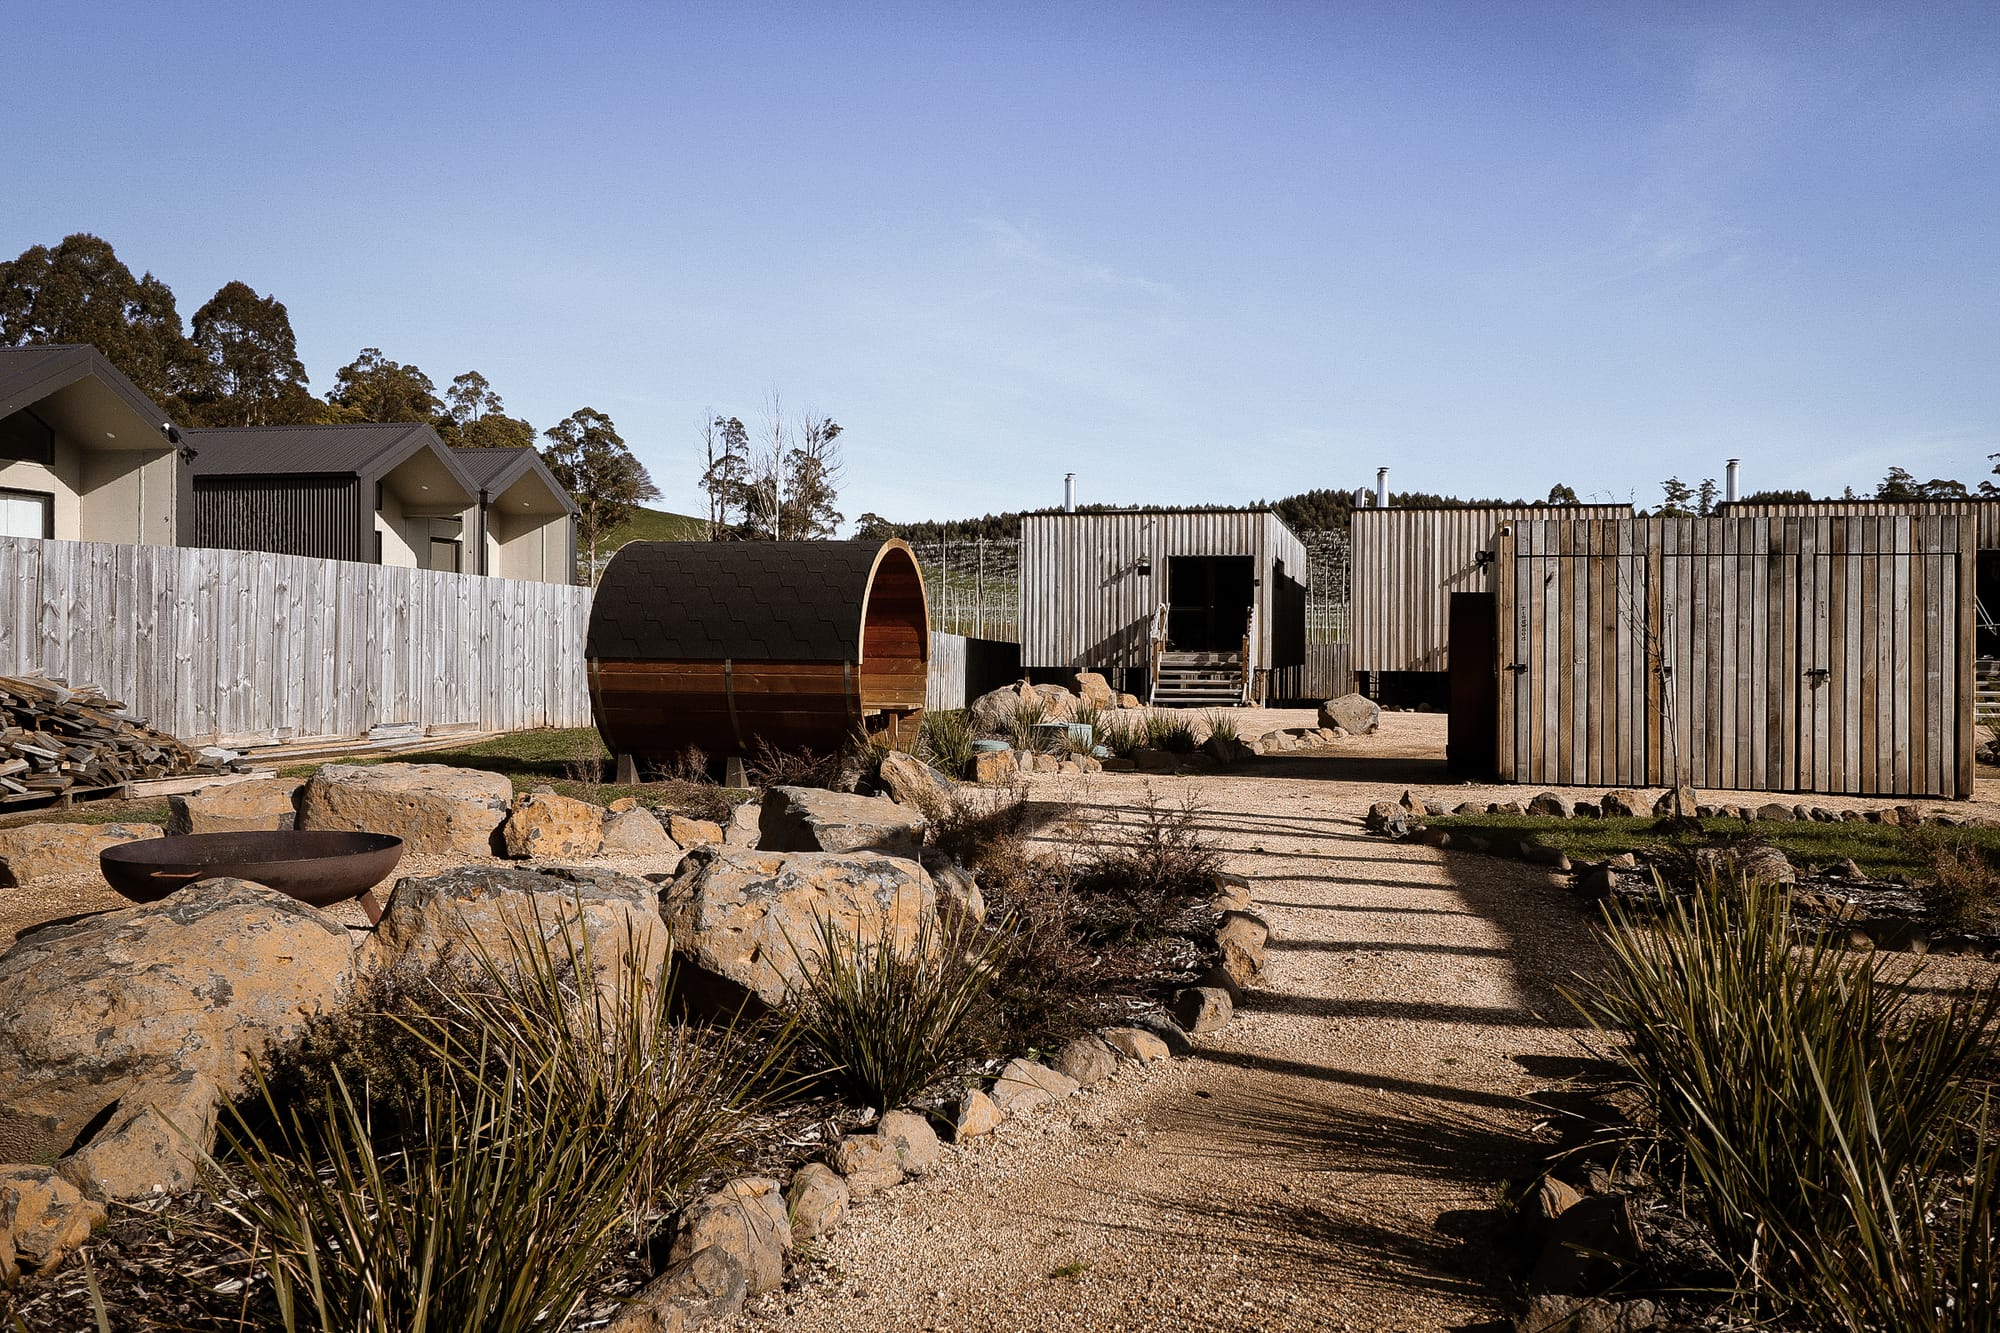 Just Down the Road. Photographer: Studio Winslow. A rural landscape with a wooden fence and a large, cylindrical wooden sauna with a curved roof, set amongst an arid garden with sparse vegetation under a clear blue sky.